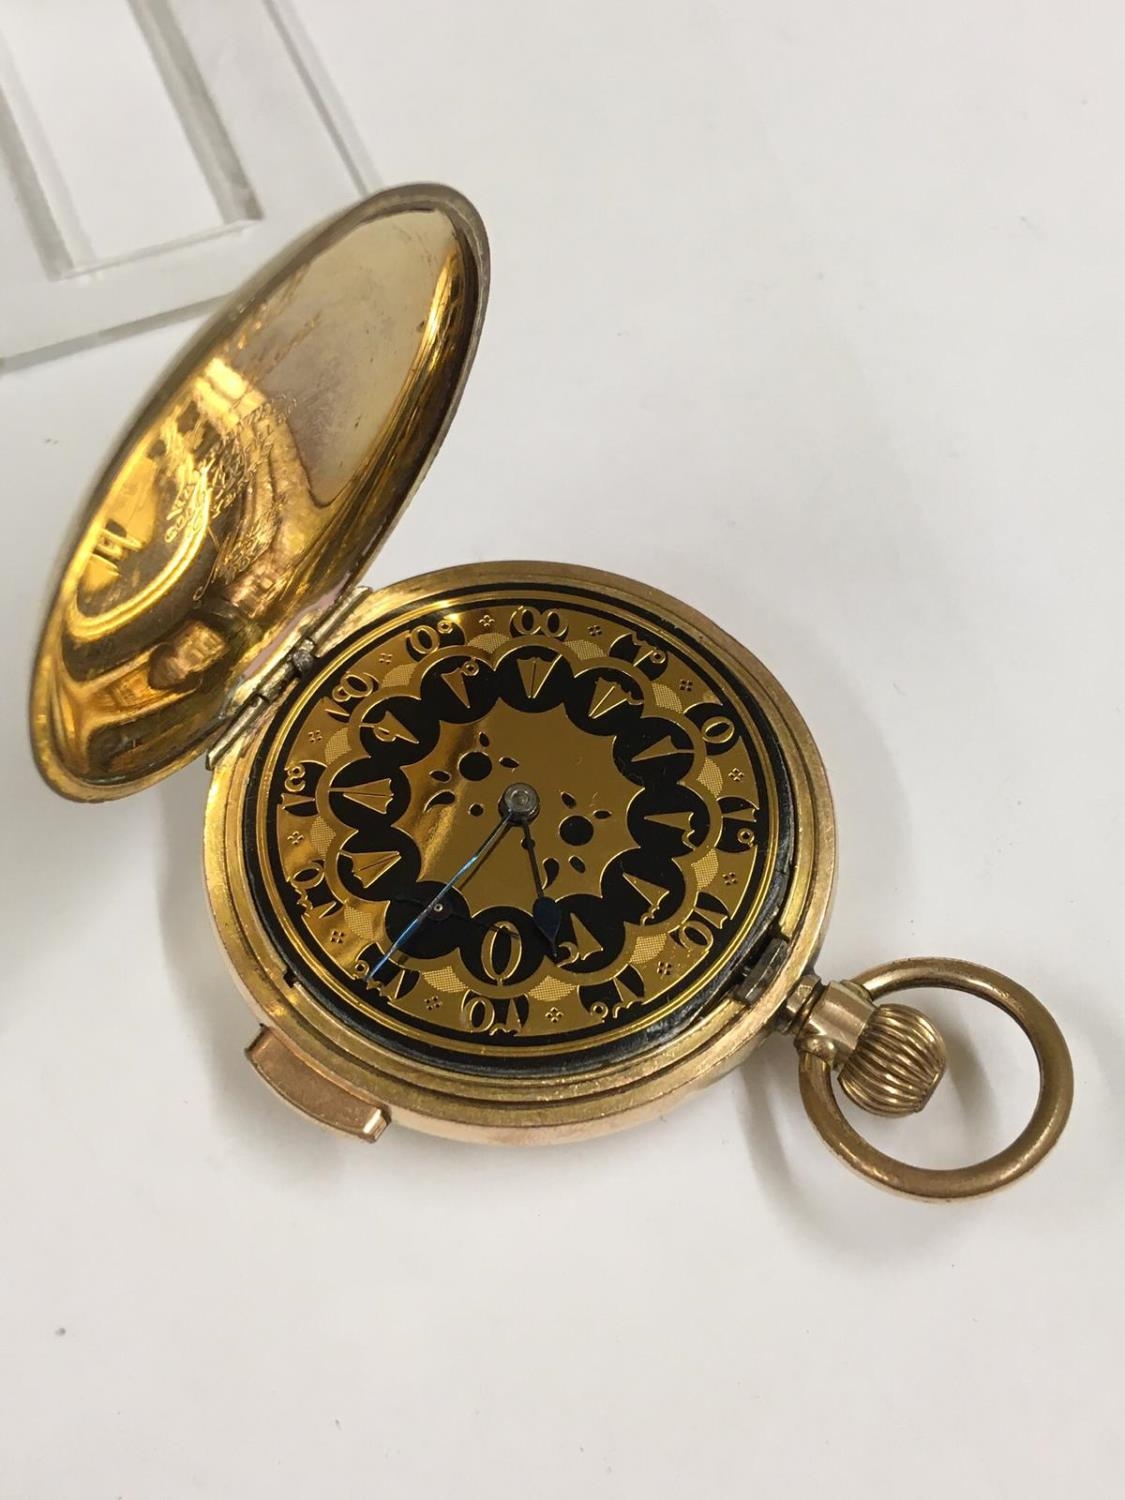 Vintage gold filled ottoman quarter repeater pocket watch ticking and repeat function working . Sold - Image 3 of 7